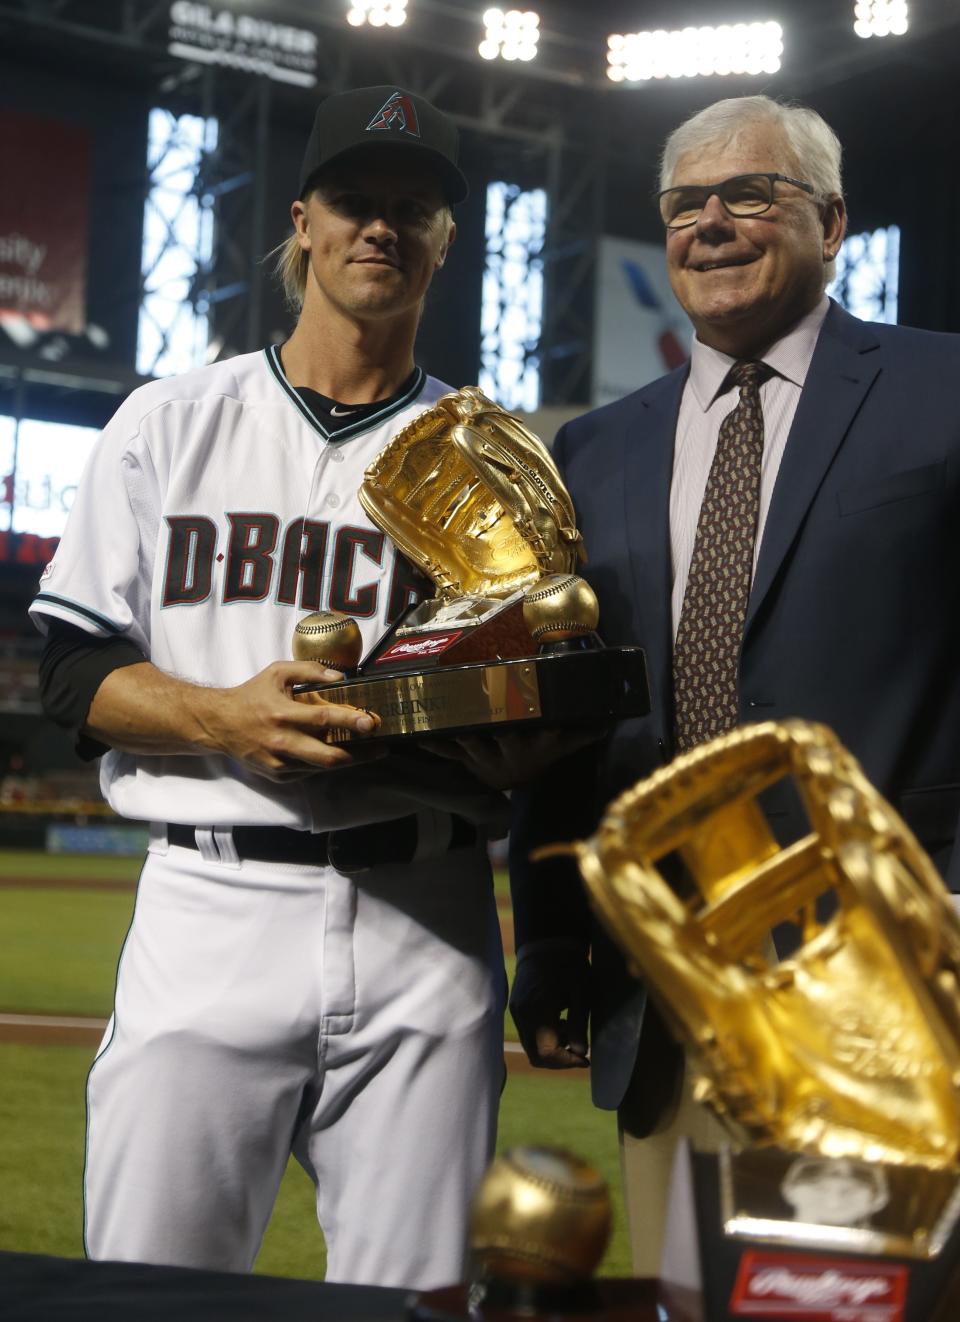 Zack Greinke had some good seasons for the Diamondbacks. Is he one of the franchise's best players ever?